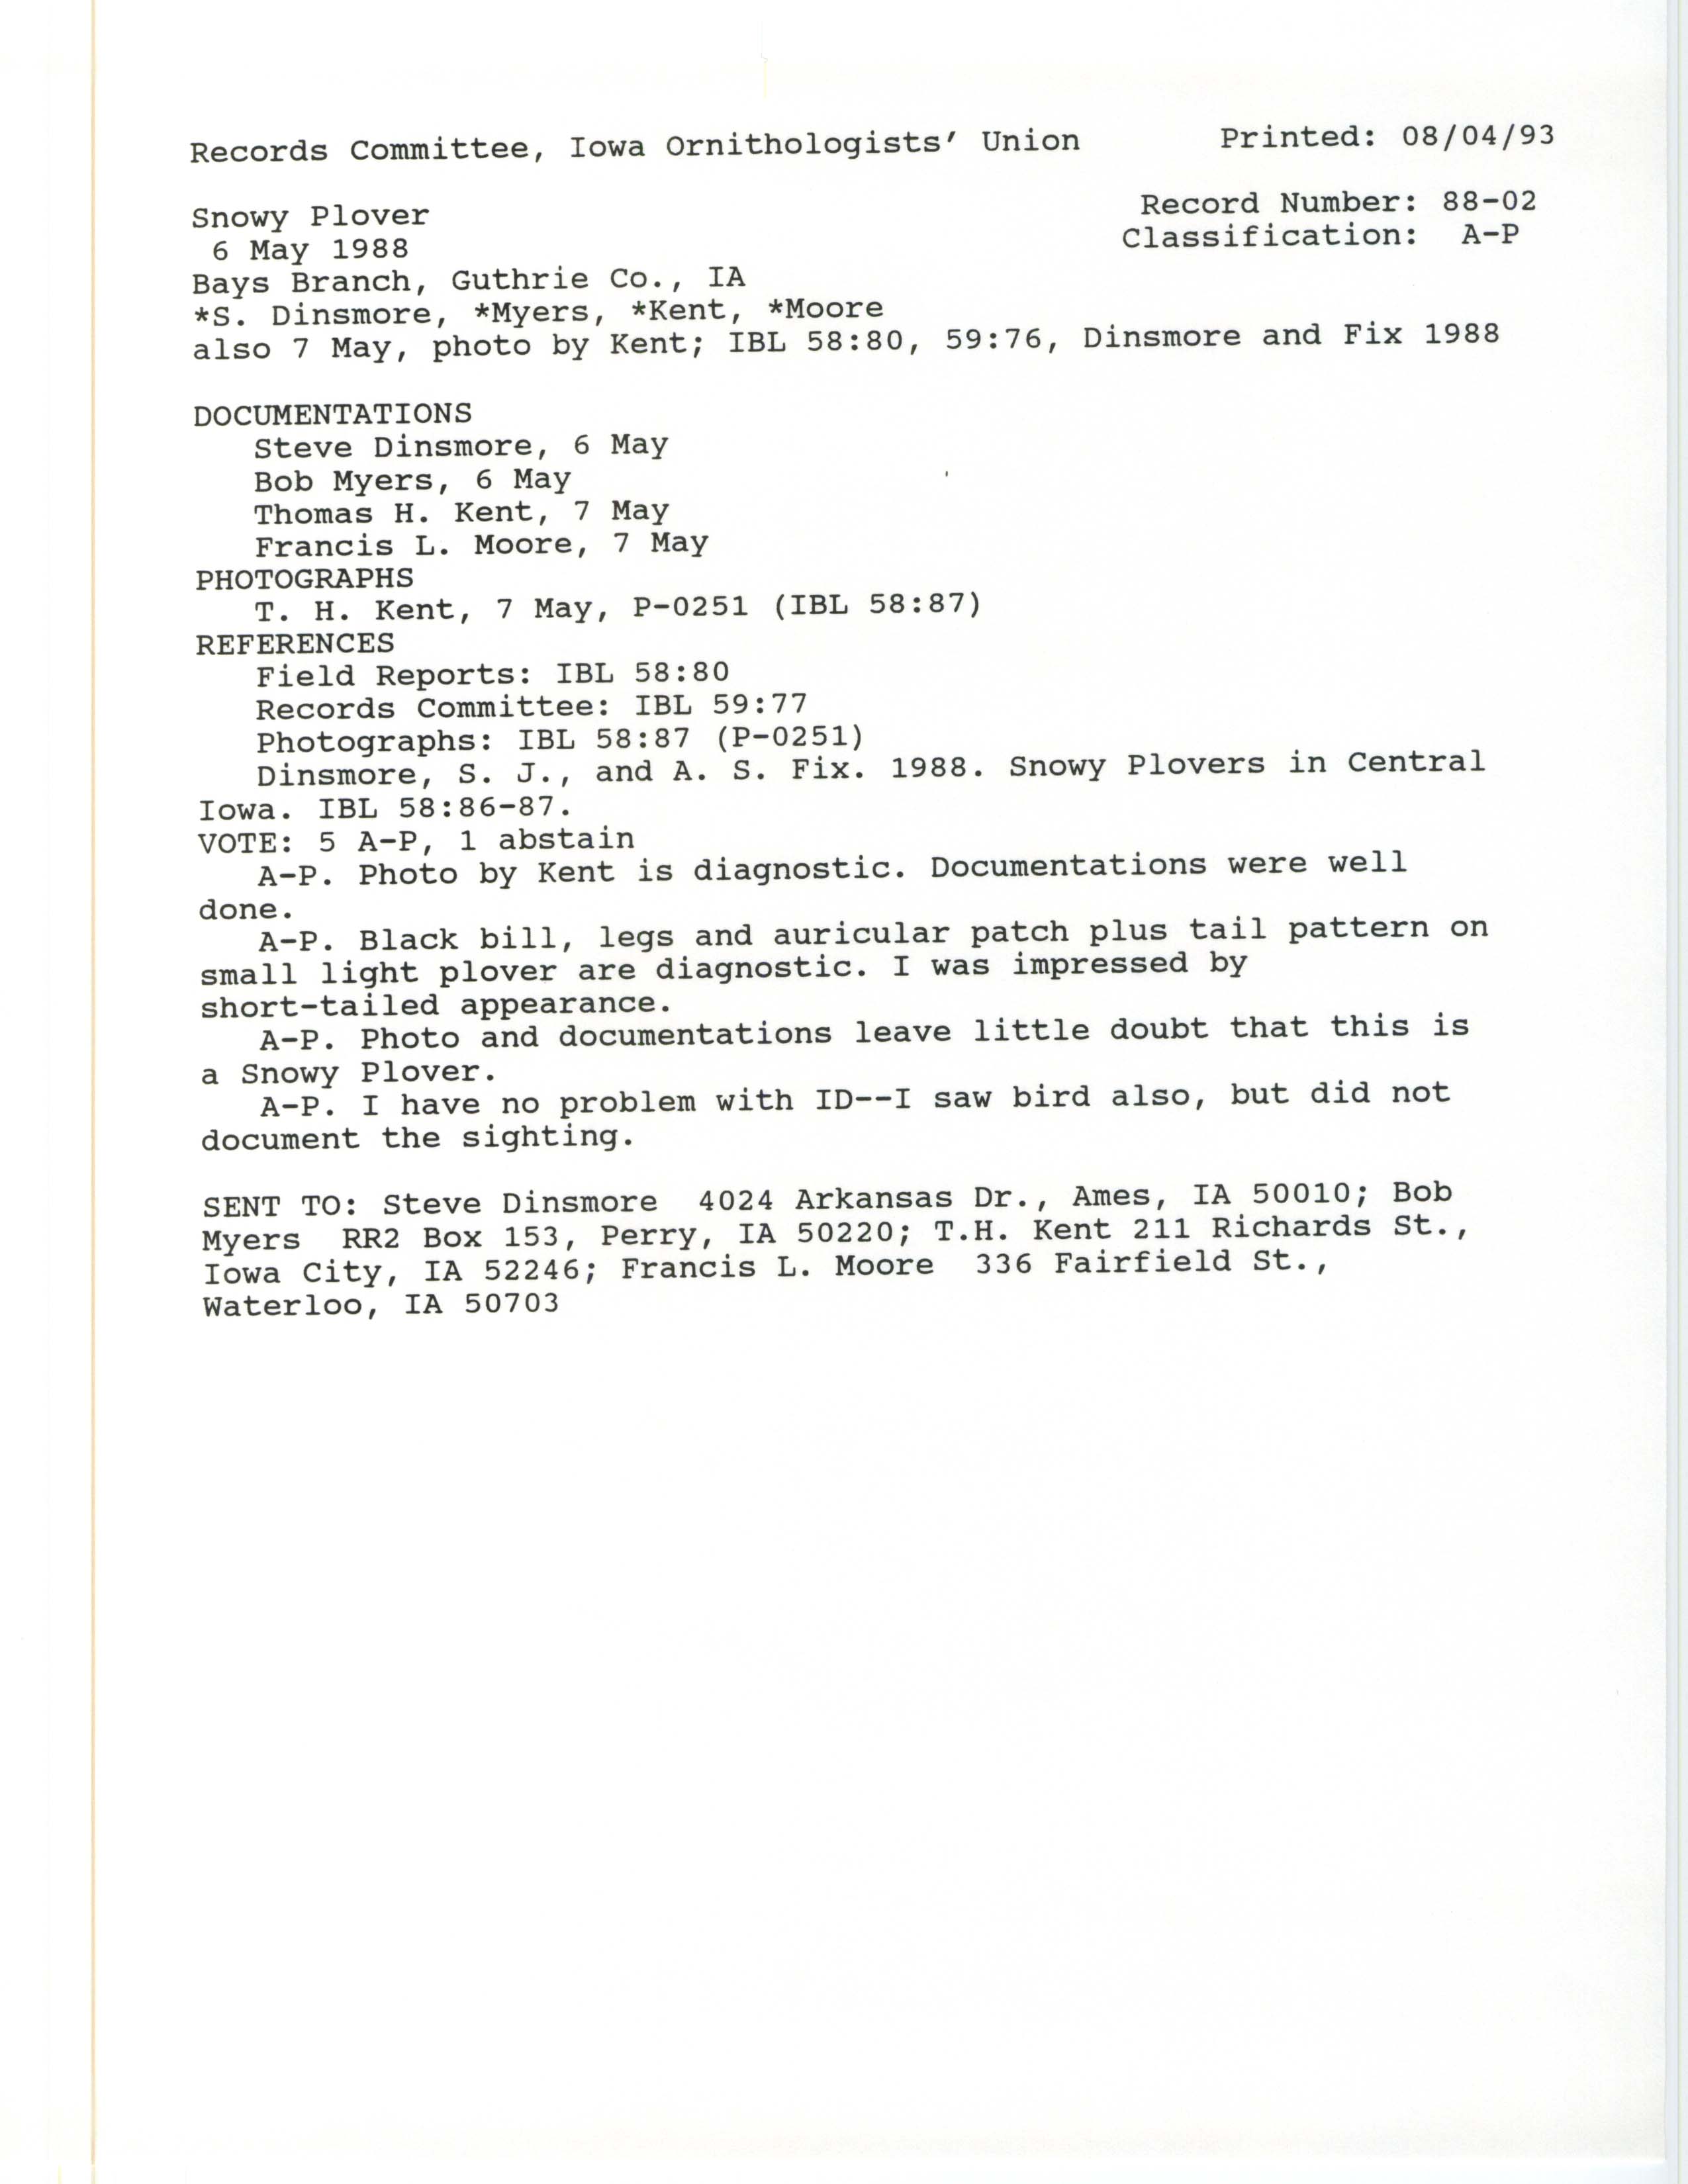 Records Committee review for rare bird sighting of Snowy Plover at Bays Branch, 1988